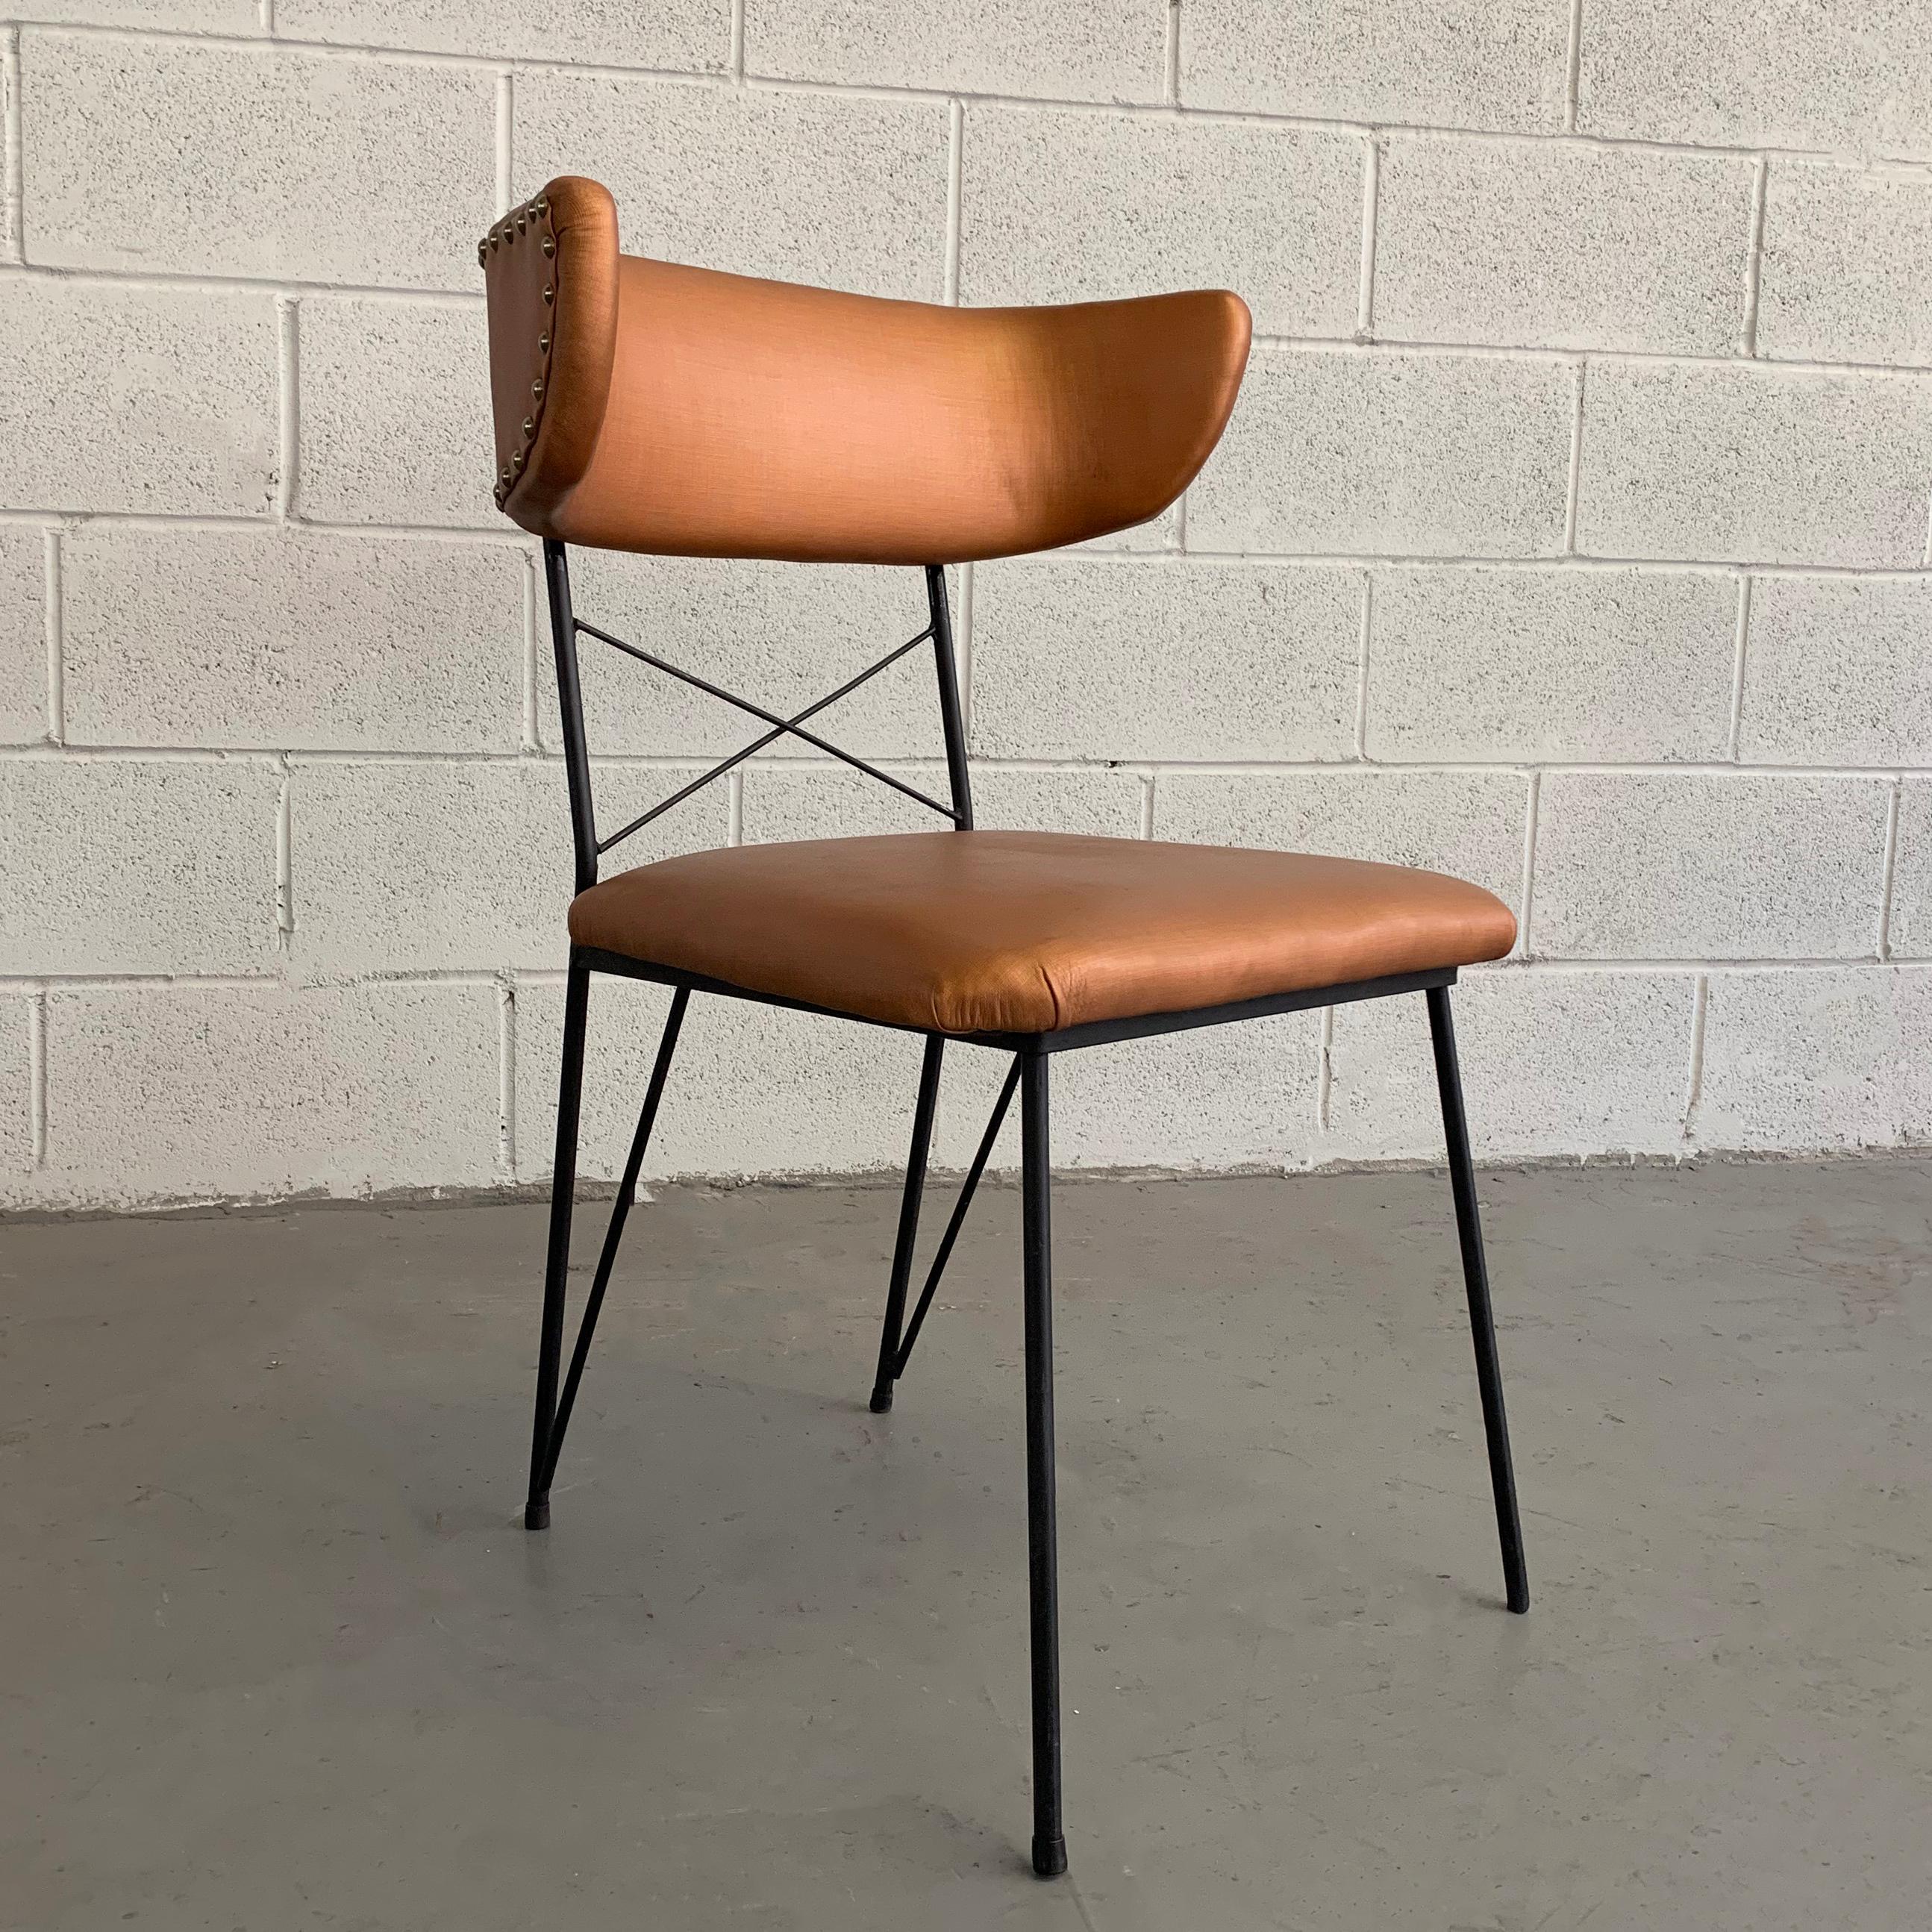 Mid-Century Modern, desk or side chair features a wrought iron frame with contrasting copper vinyl upholstery and nailhead detail on backrest.